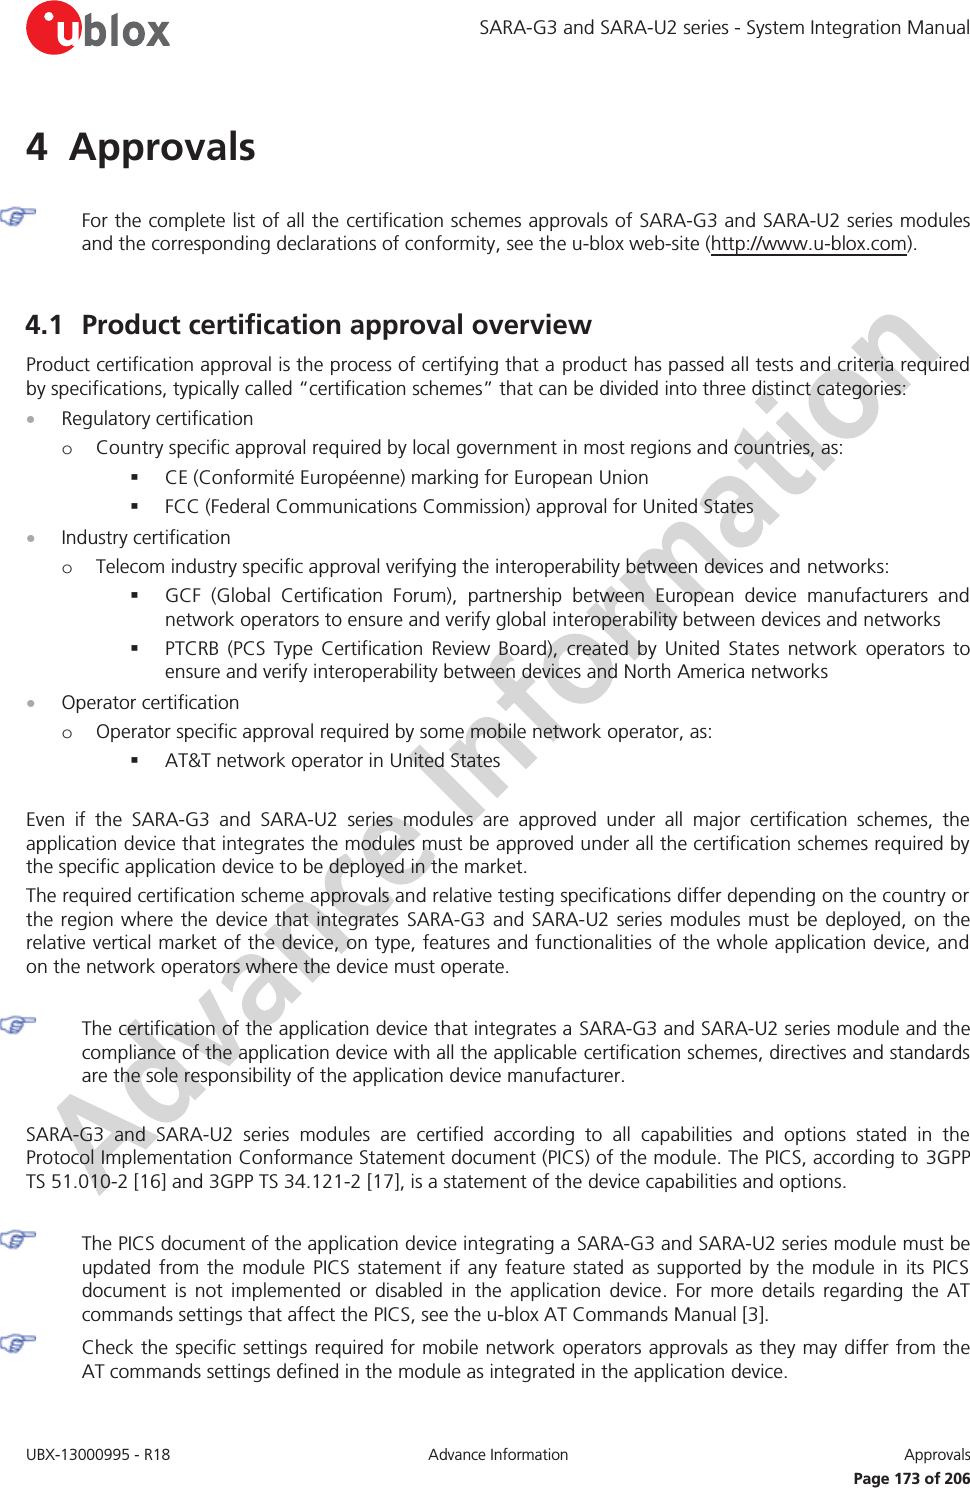 SARA-G3 and SARA-U2 series - System Integration Manual UBX-13000995 - R18  Advance Information  Approvals   Page 173 of 206 4 Approvals   For the complete list of all the certification schemes approvals of SARA-G3 and SARA-U2 series modules and the corresponding declarations of conformity, see the u-blox web-site (http://www.u-blox.com).  4.1 Product certification approval overview Product certification approval is the process of certifying that a product has passed all tests and criteria required by specifications, typically called “certification schemes” that can be divided into three distinct categories: x Regulatory certification o Country specific approval required by local government in most regions and countries, as:  CE (Conformité Européenne) marking for European Union  FCC (Federal Communications Commission) approval for United States x Industry certification o Telecom industry specific approval verifying the interoperability between devices and networks:  GCF (Global Certification Forum), partnership between European device manufacturers and network operators to ensure and verify global interoperability between devices and networks  PTCRB (PCS Type Certification Review Board), created by United States network operators to ensure and verify interoperability between devices and North America networks x Operator certification o Operator specific approval required by some mobile network operator, as:  AT&amp;T network operator in United States  Even if the SARA-G3 and SARA-U2 series modules are approved under all major certification schemes, the application device that integrates the modules must be approved under all the certification schemes required by the specific application device to be deployed in the market. The required certification scheme approvals and relative testing specifications differ depending on the country or the region where the device that integrates SARA-G3 and SARA-U2 series modules must be deployed, on the relative vertical market of the device, on type, features and functionalities of the whole application device, and on the network operators where the device must operate.   The certification of the application device that integrates a SARA-G3 and SARA-U2 series module and the compliance of the application device with all the applicable certification schemes, directives and standards are the sole responsibility of the application device manufacturer.  SARA-G3 and SARA-U2 series modules are certified according to all capabilities and options stated in the Protocol Implementation Conformance Statement document (PICS) of the module. The PICS, according to 3GPP TS 51.010-2 [16] and 3GPP TS 34.121-2 [17], is a statement of the device capabilities and options.   The PICS document of the application device integrating a SARA-G3 and SARA-U2 series module must be updated from the module PICS statement if any feature stated as supported by the module in its PICS document is not implemented or disabled in the application device. For more details regarding the AT commands settings that affect the PICS, see the u-blox AT Commands Manual [3]. Check the specific settings required for mobile network operators approvals as they may differ from the AT commands settings defined in the module as integrated in the application device.  